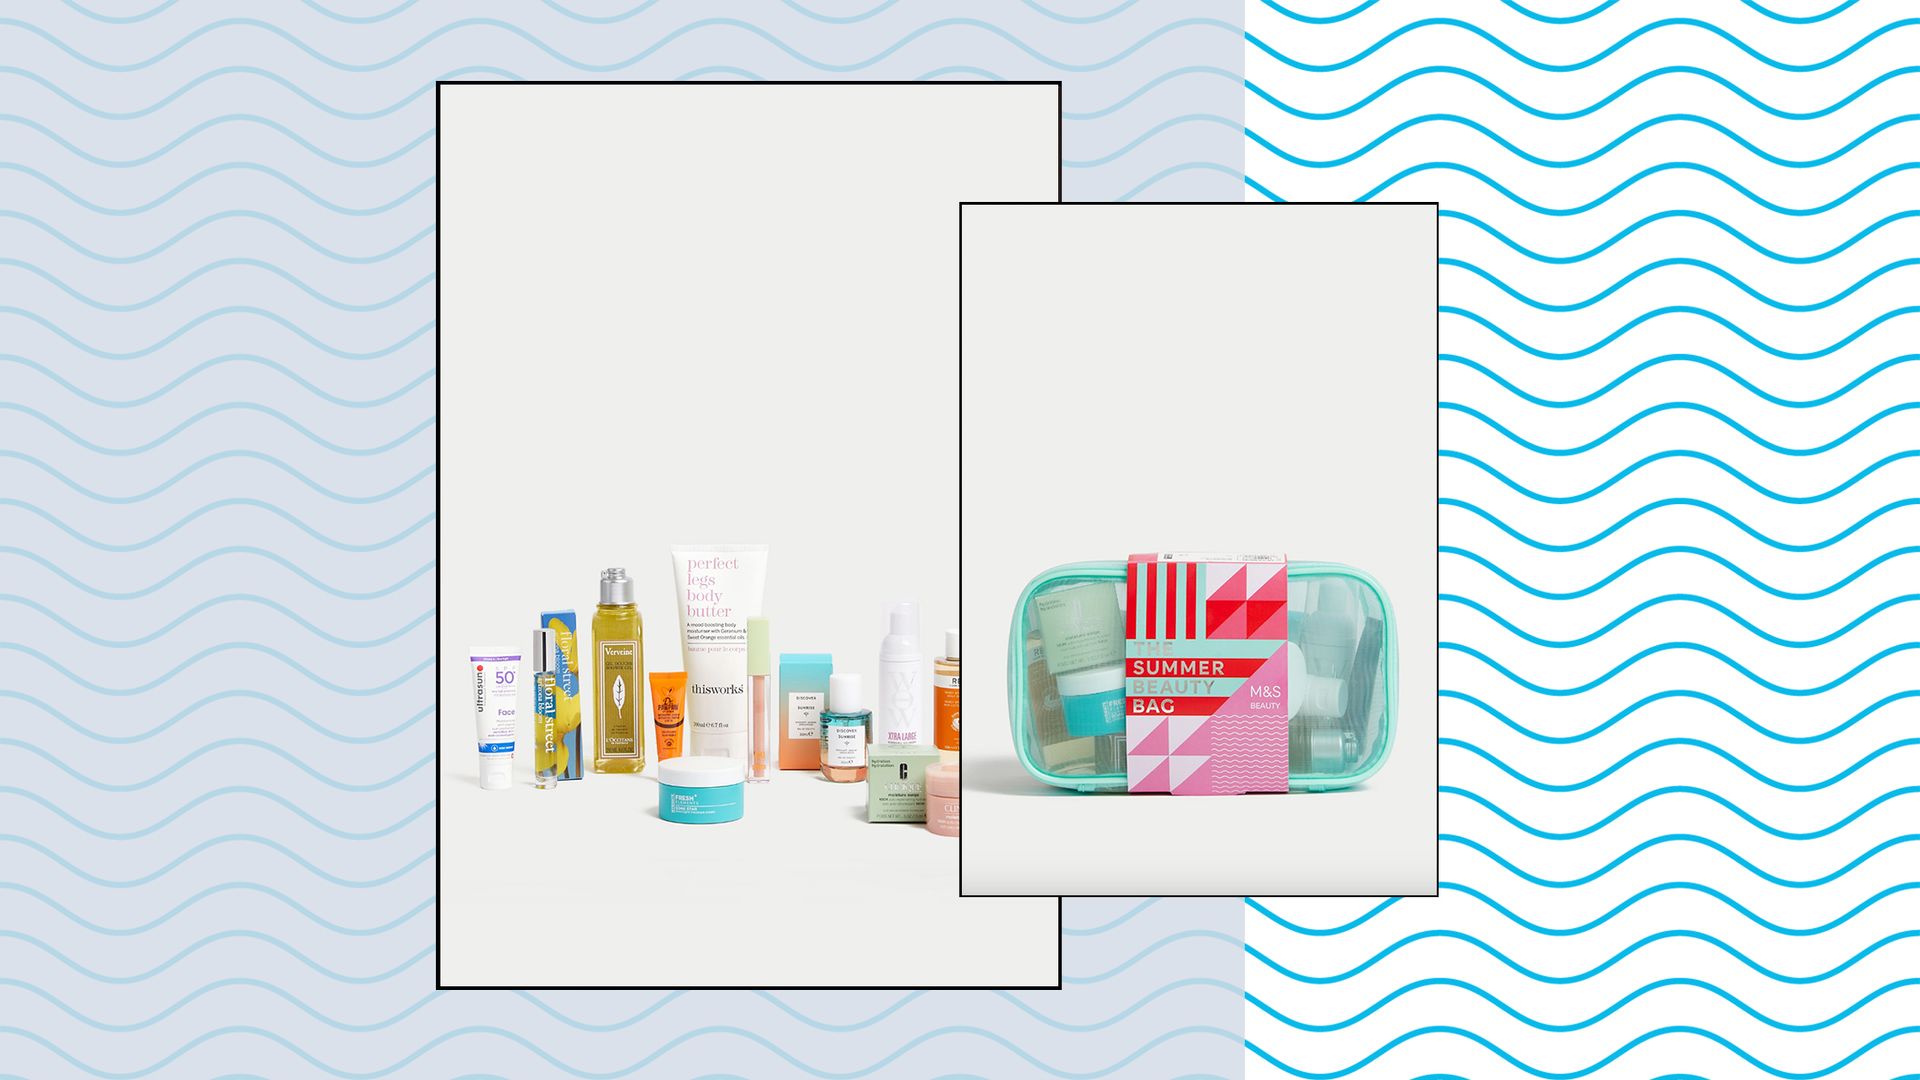 M&S just dropped a £30 summer beauty bag (worth £170) and it's full of my favourite products